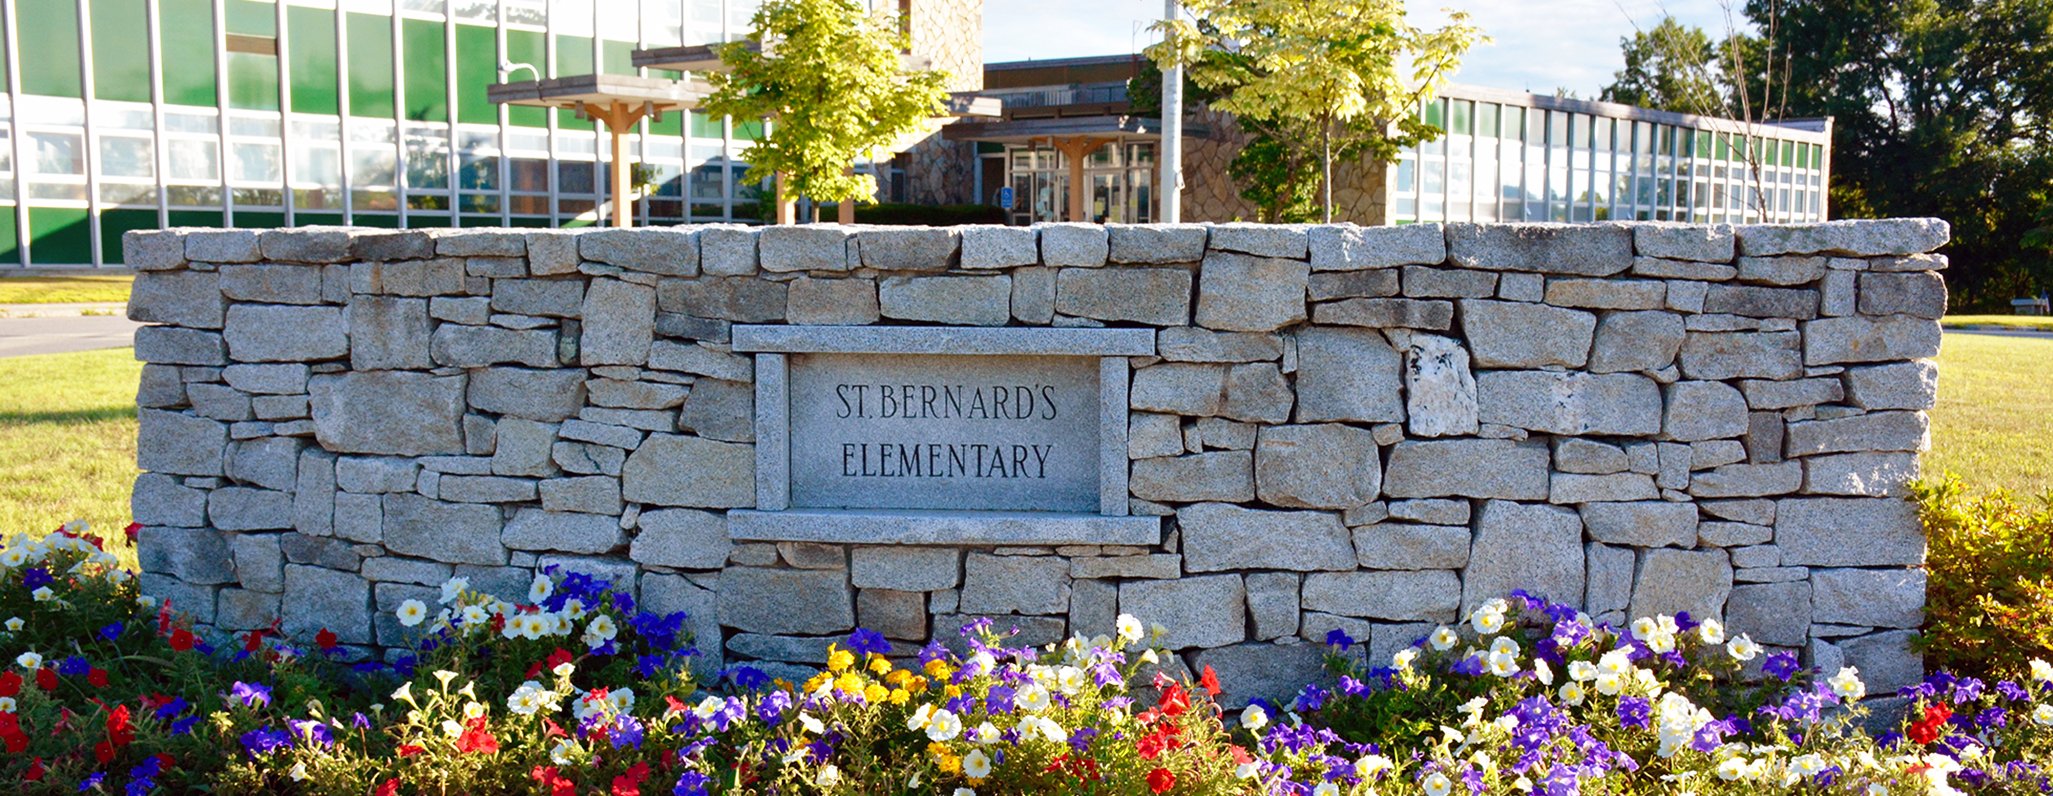 A stone sign with the words "Saint Bernards Elementary School" carved into it. There are flowers growing around the sign